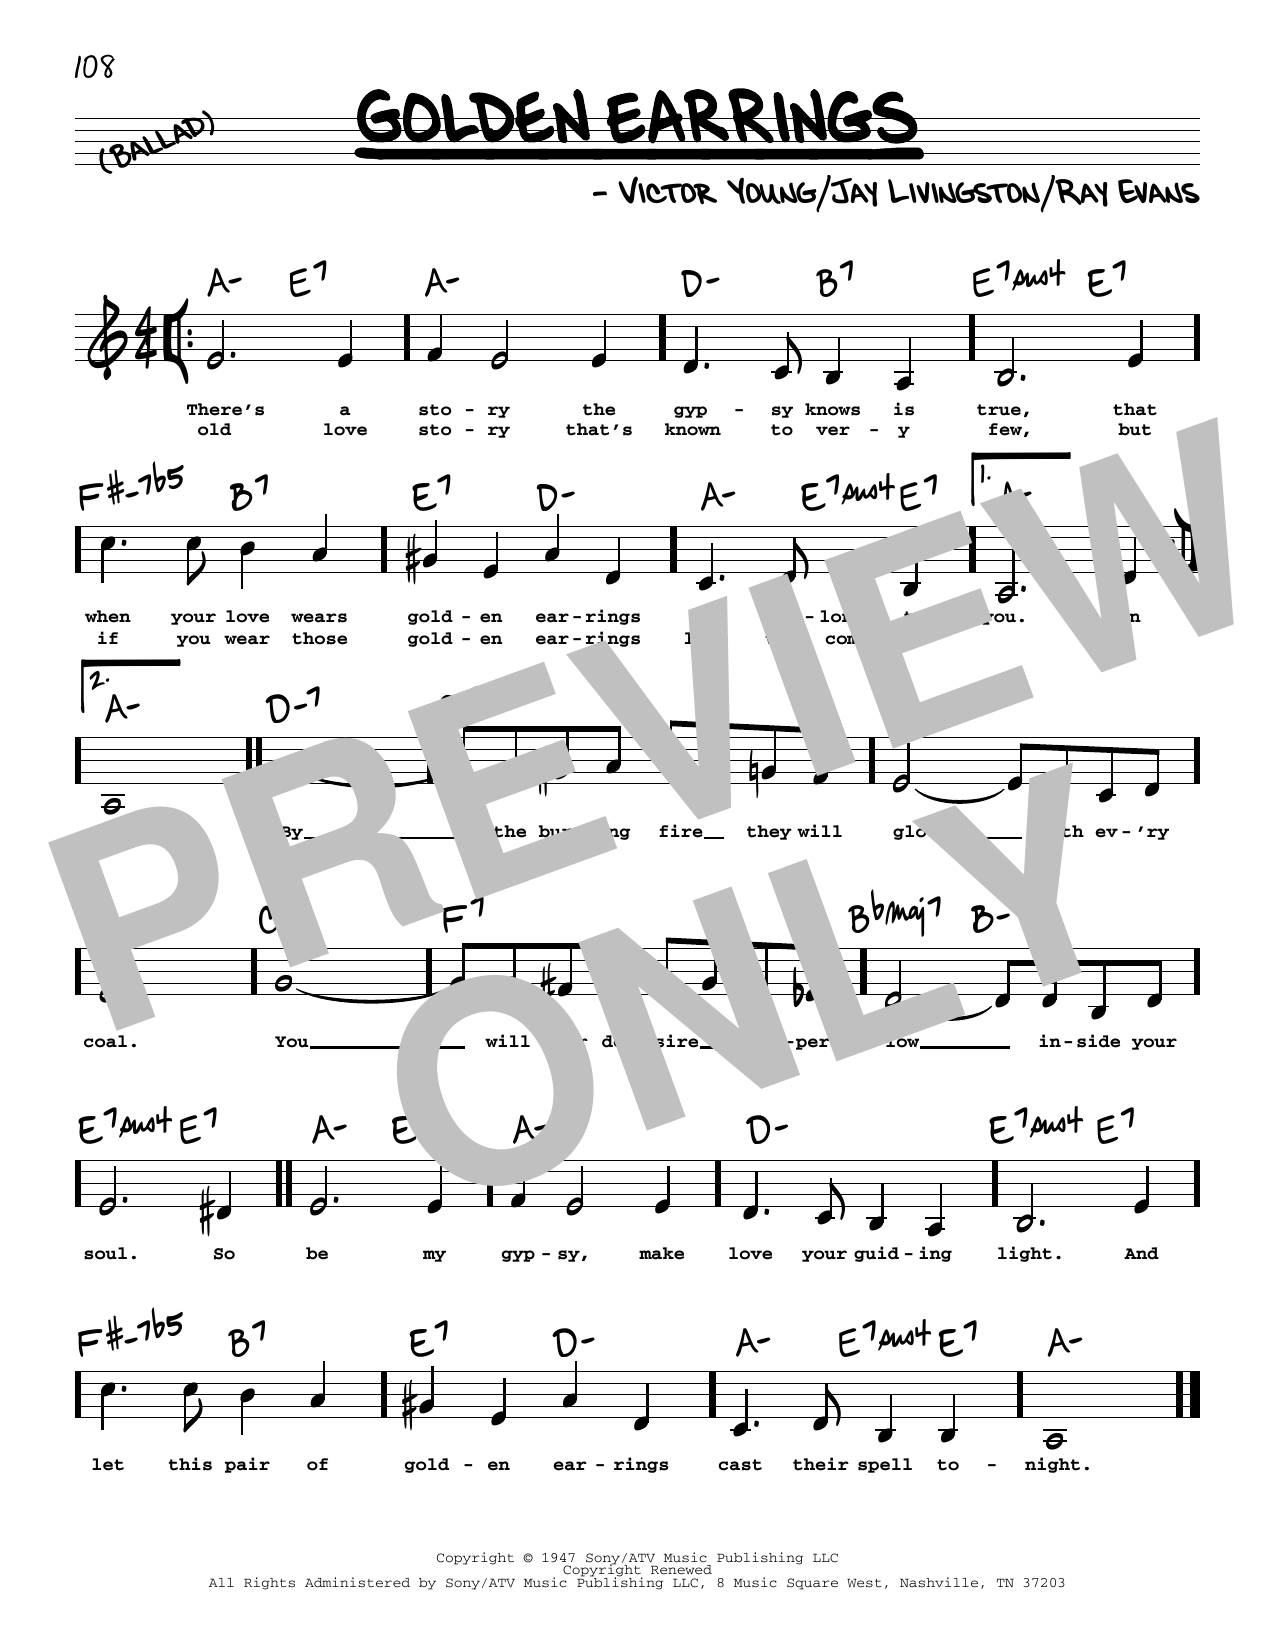 Peggy Lee Golden Earrings (Low Voice) sheet music notes printable PDF score